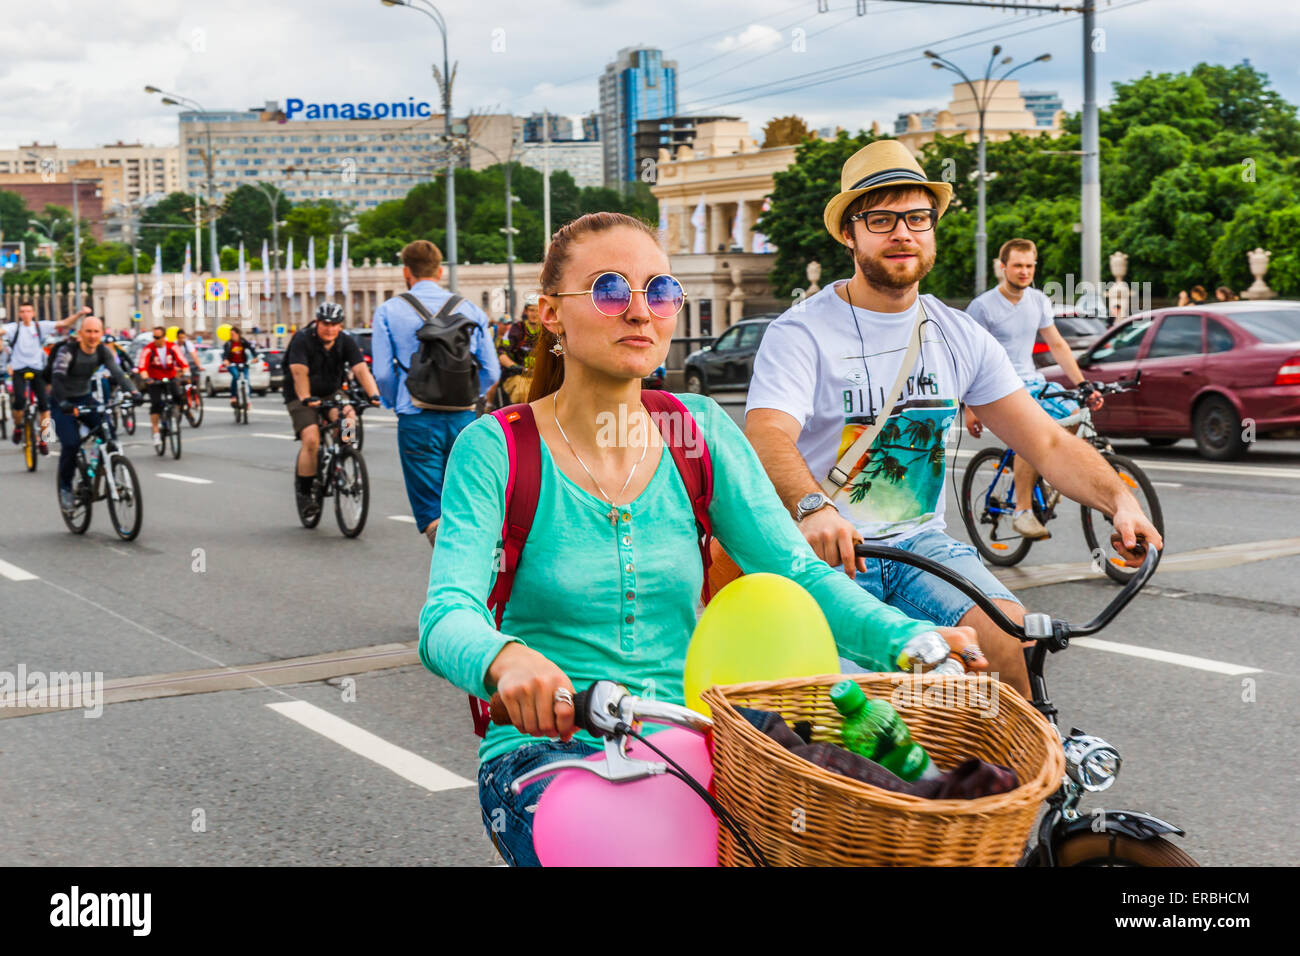 Moscow, Russia, Sunday, May 31st, 2015. 5th annual Moscow Bike Parade. The parade was organized by the Let's Bike It! project to promote the development of the bicycle infrastructure and road traffic safety in the city. Beauty. Credit:  Alex's Pictures/Alamy Live News Stock Photo